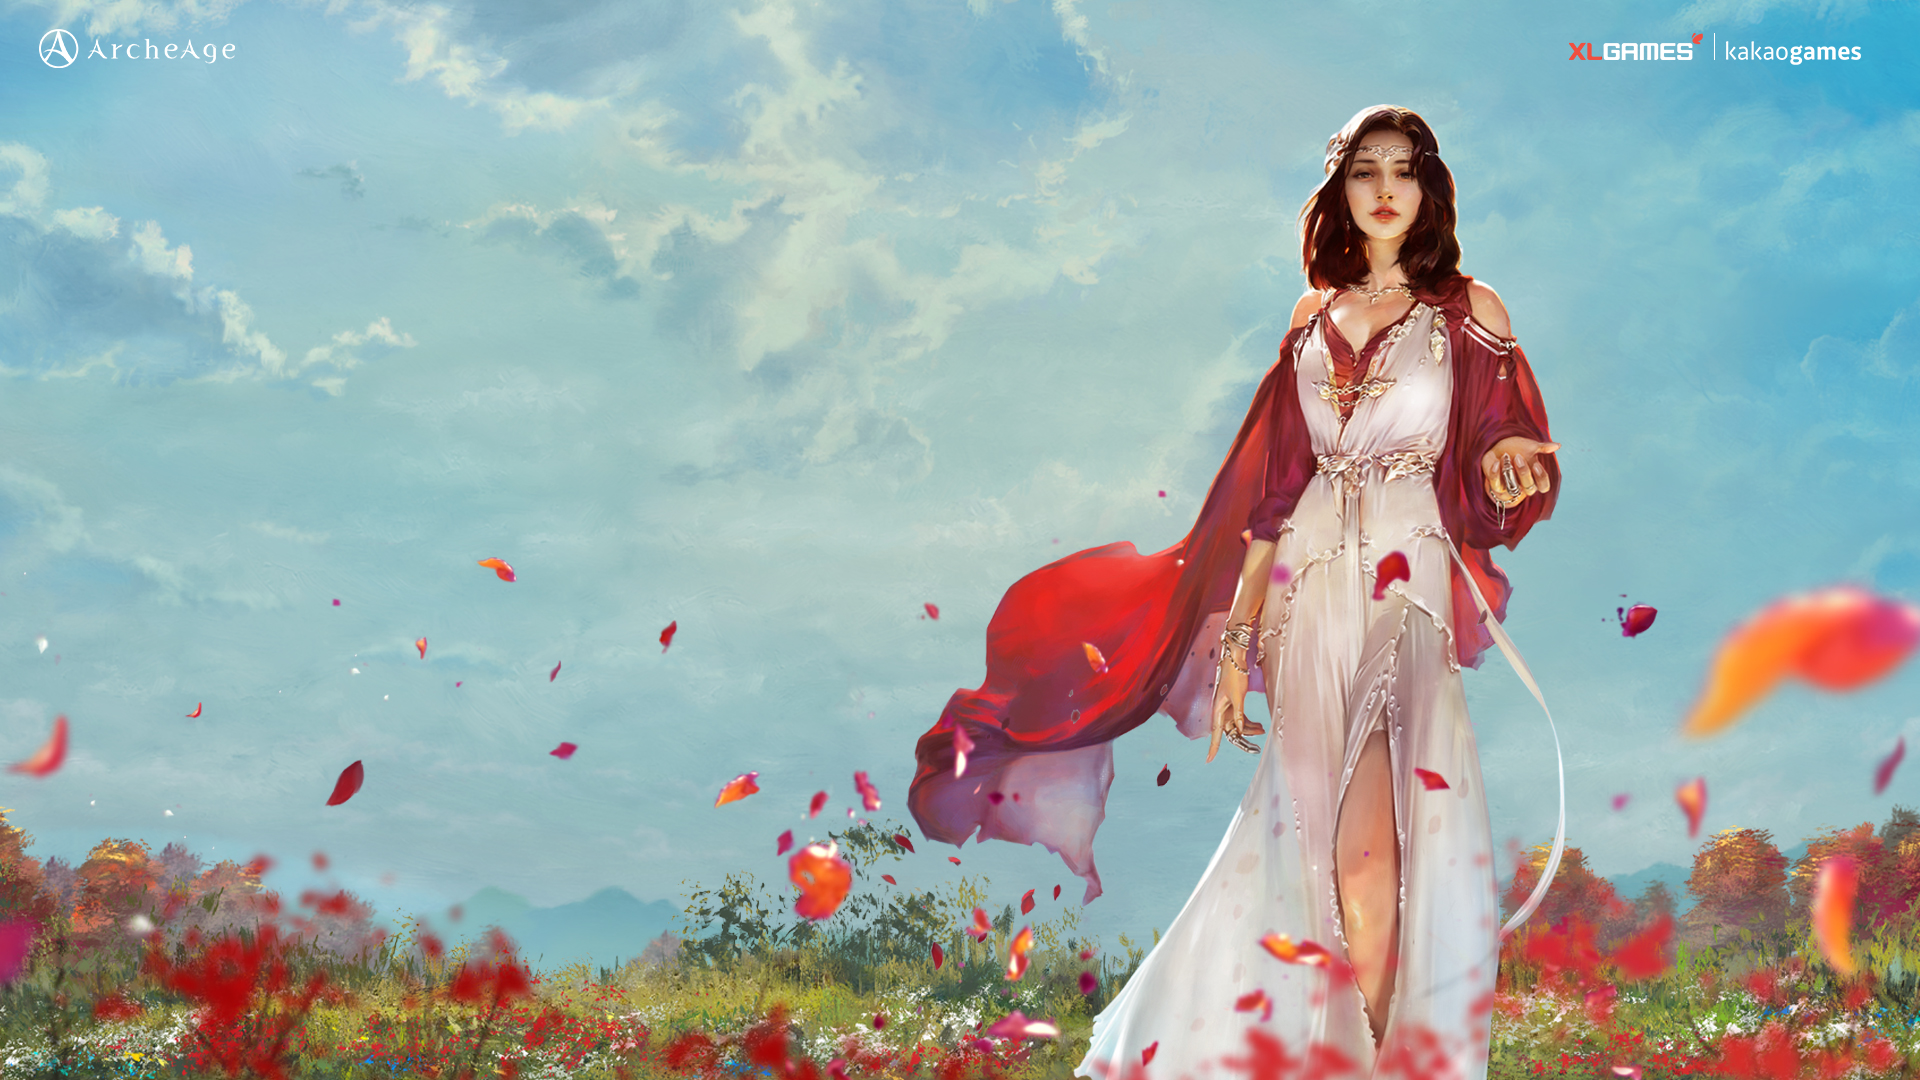 Video Game ArcheAge HD Wallpaper | Background Image